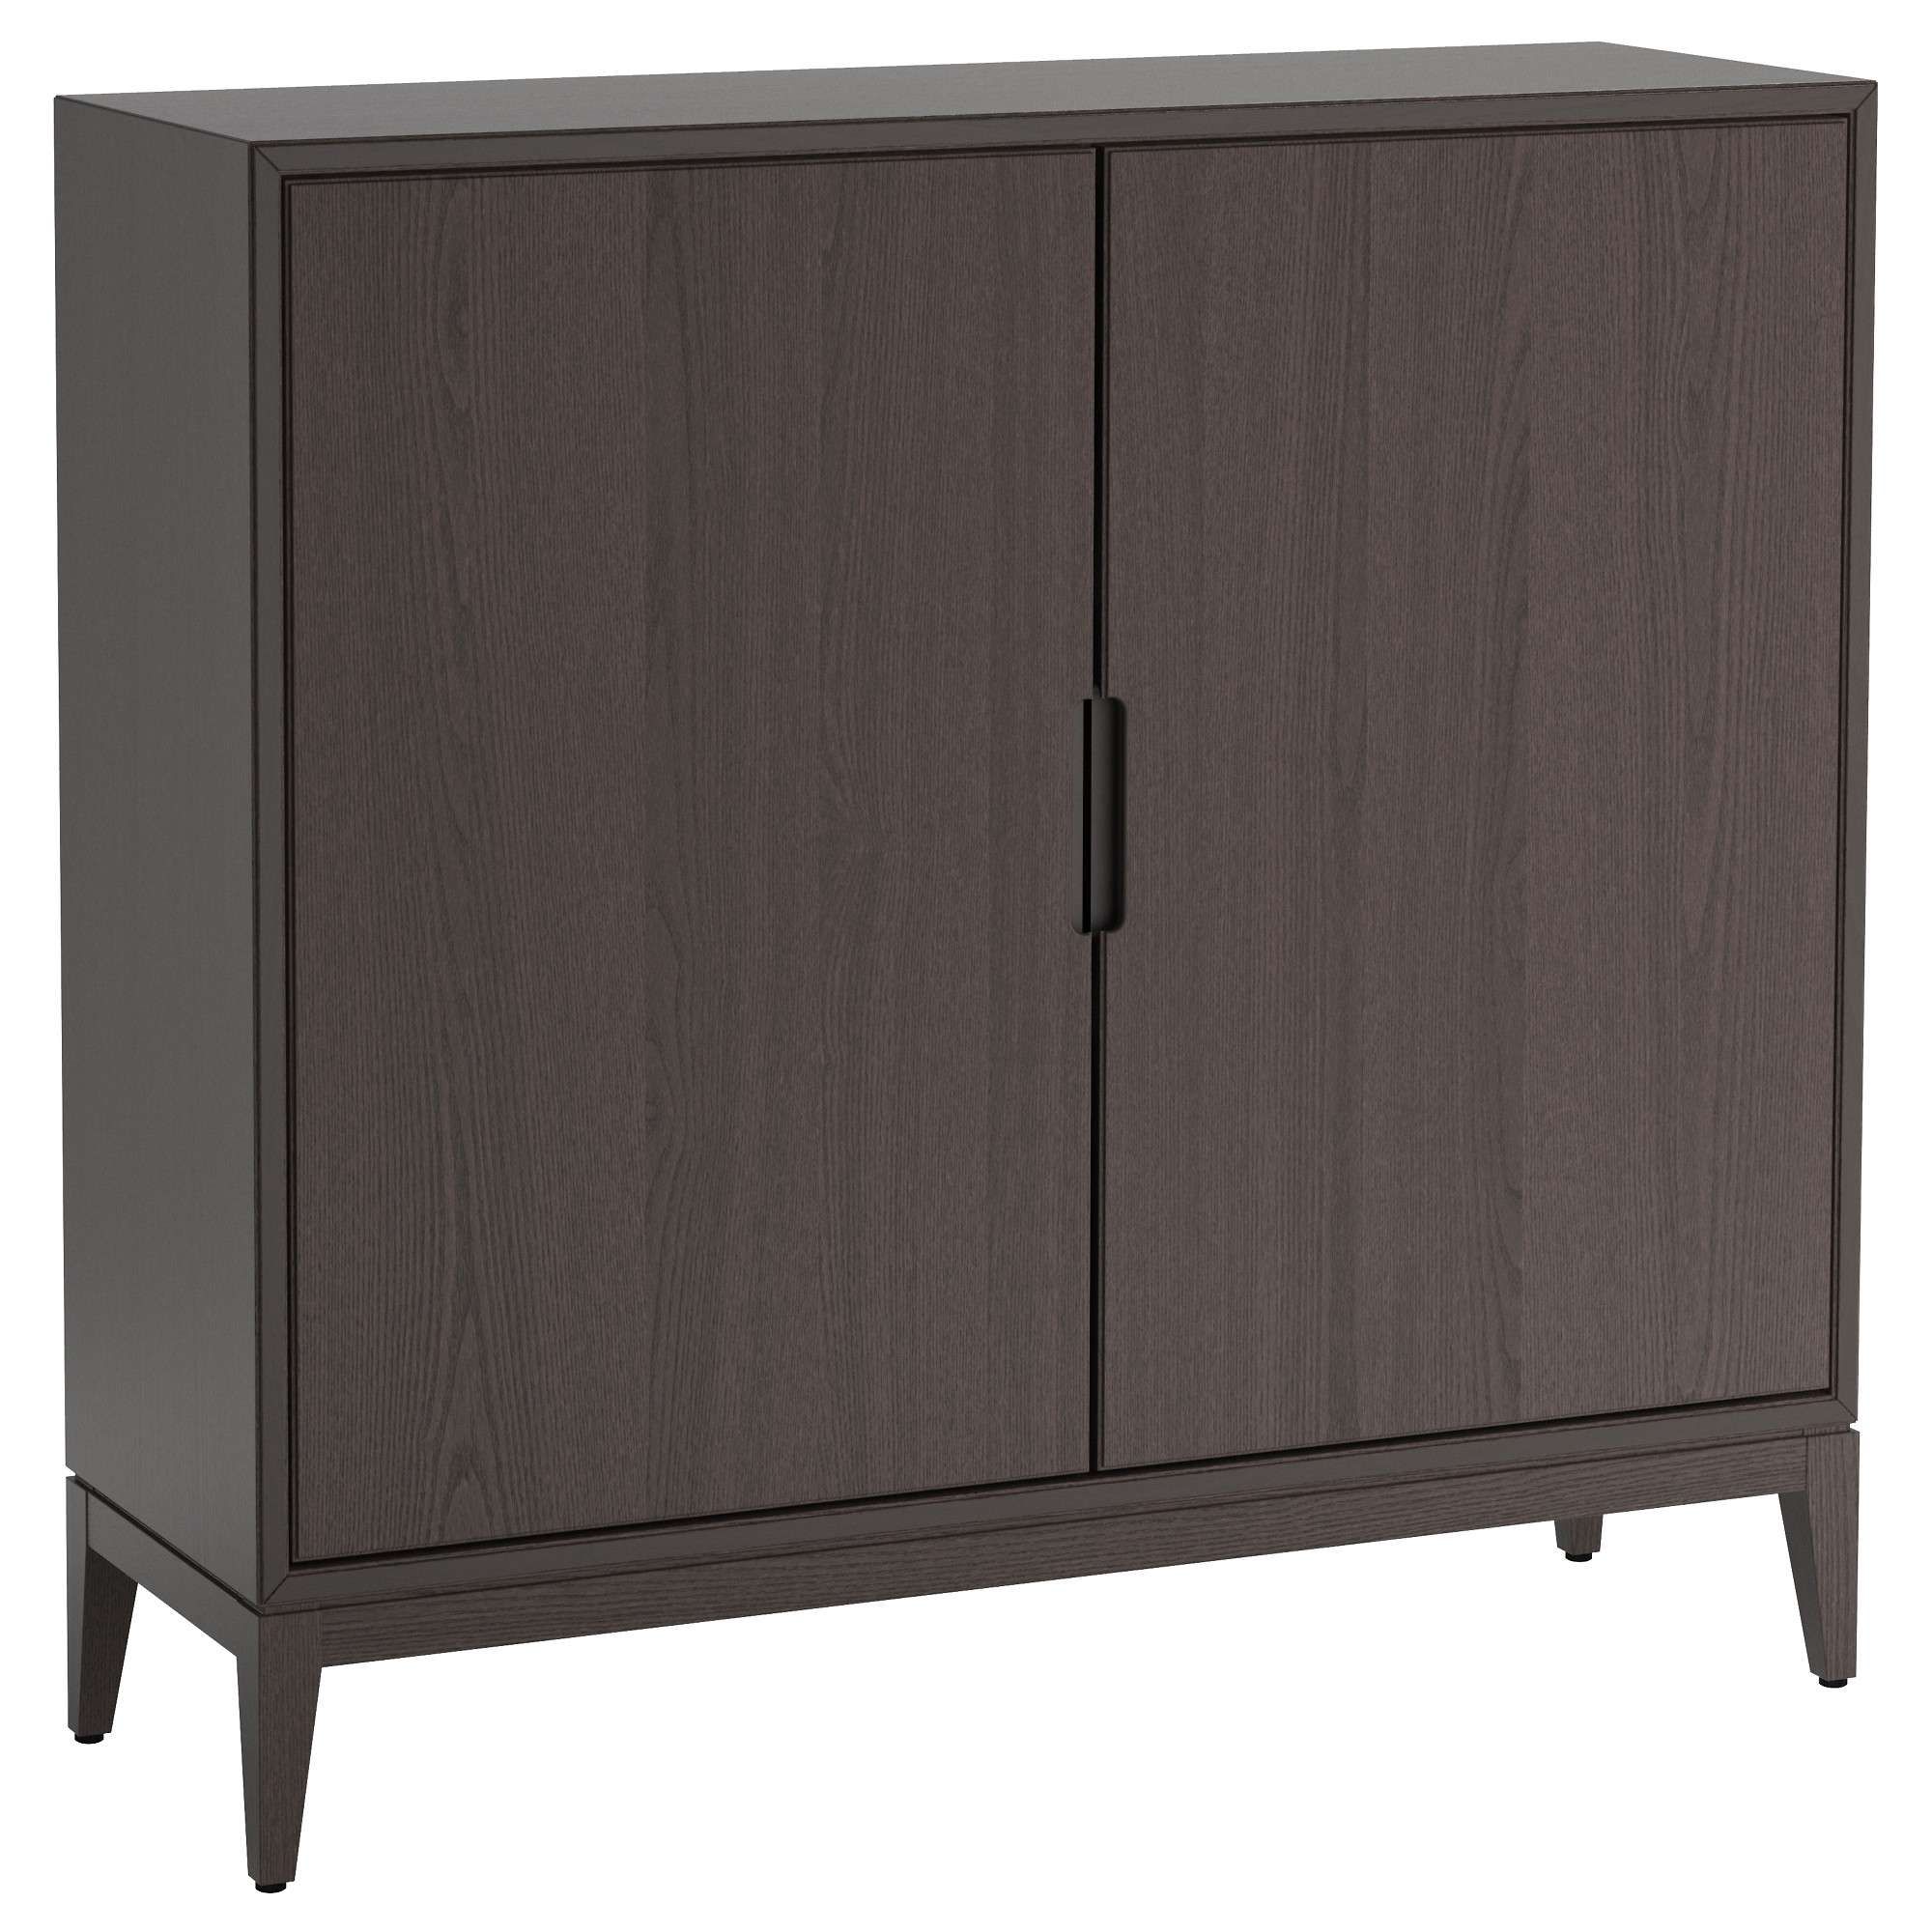 Cabinets & Sideboards – Ikea With Regard To Black Sideboards Cabinets (View 9 of 20)